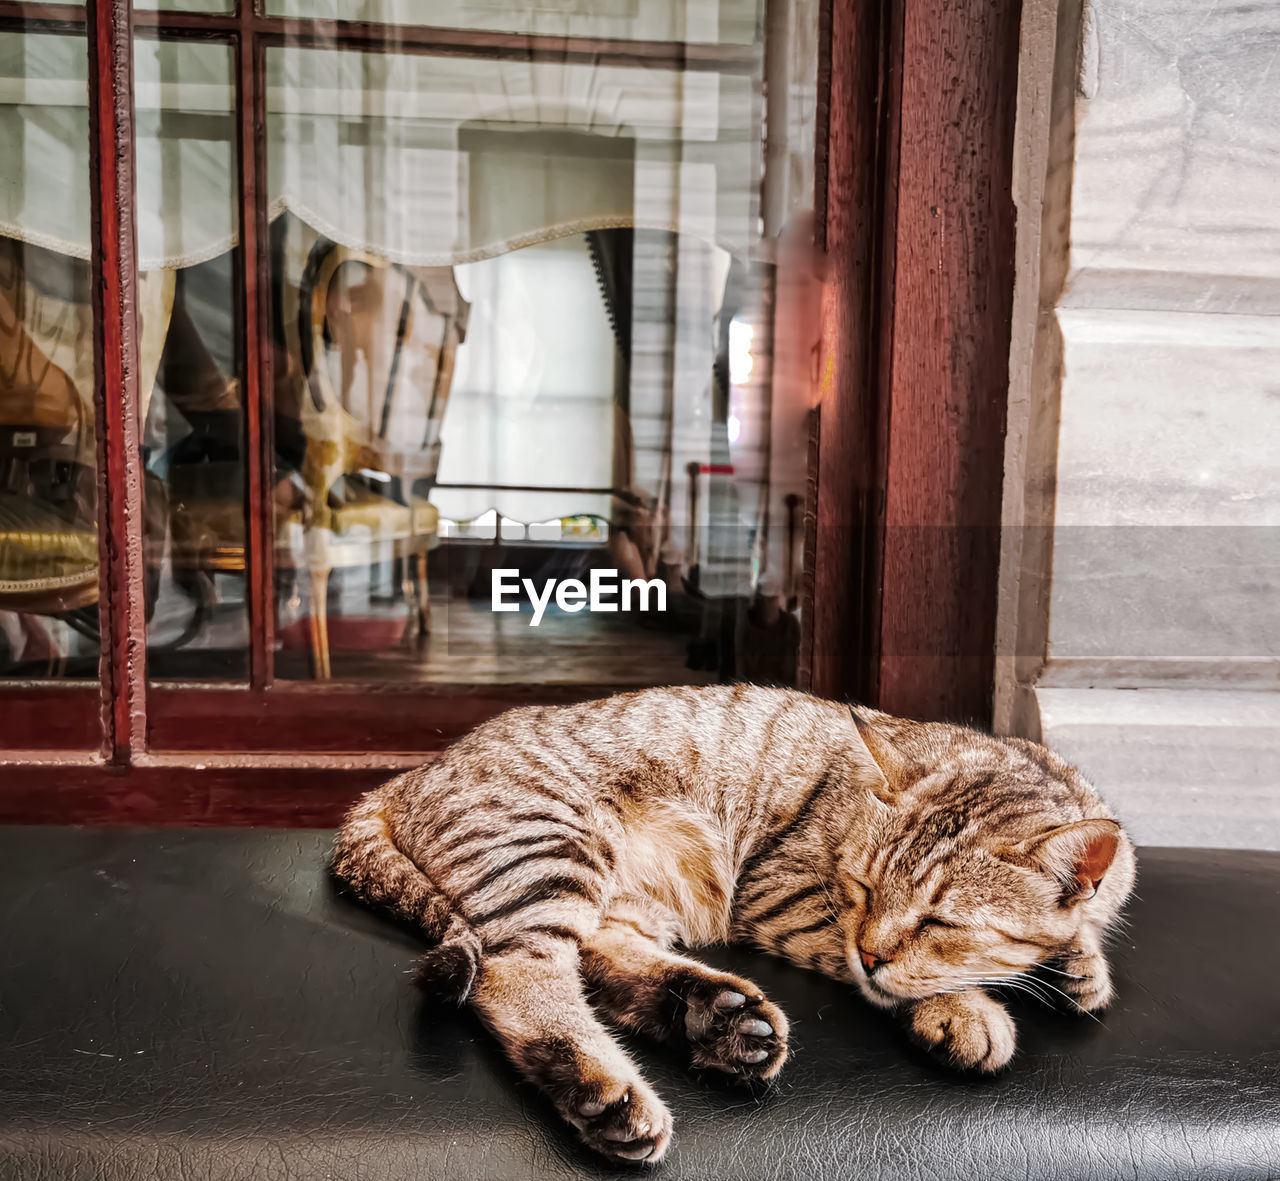 Cat sleeping in a window at dolmabahçe palace, istanbul